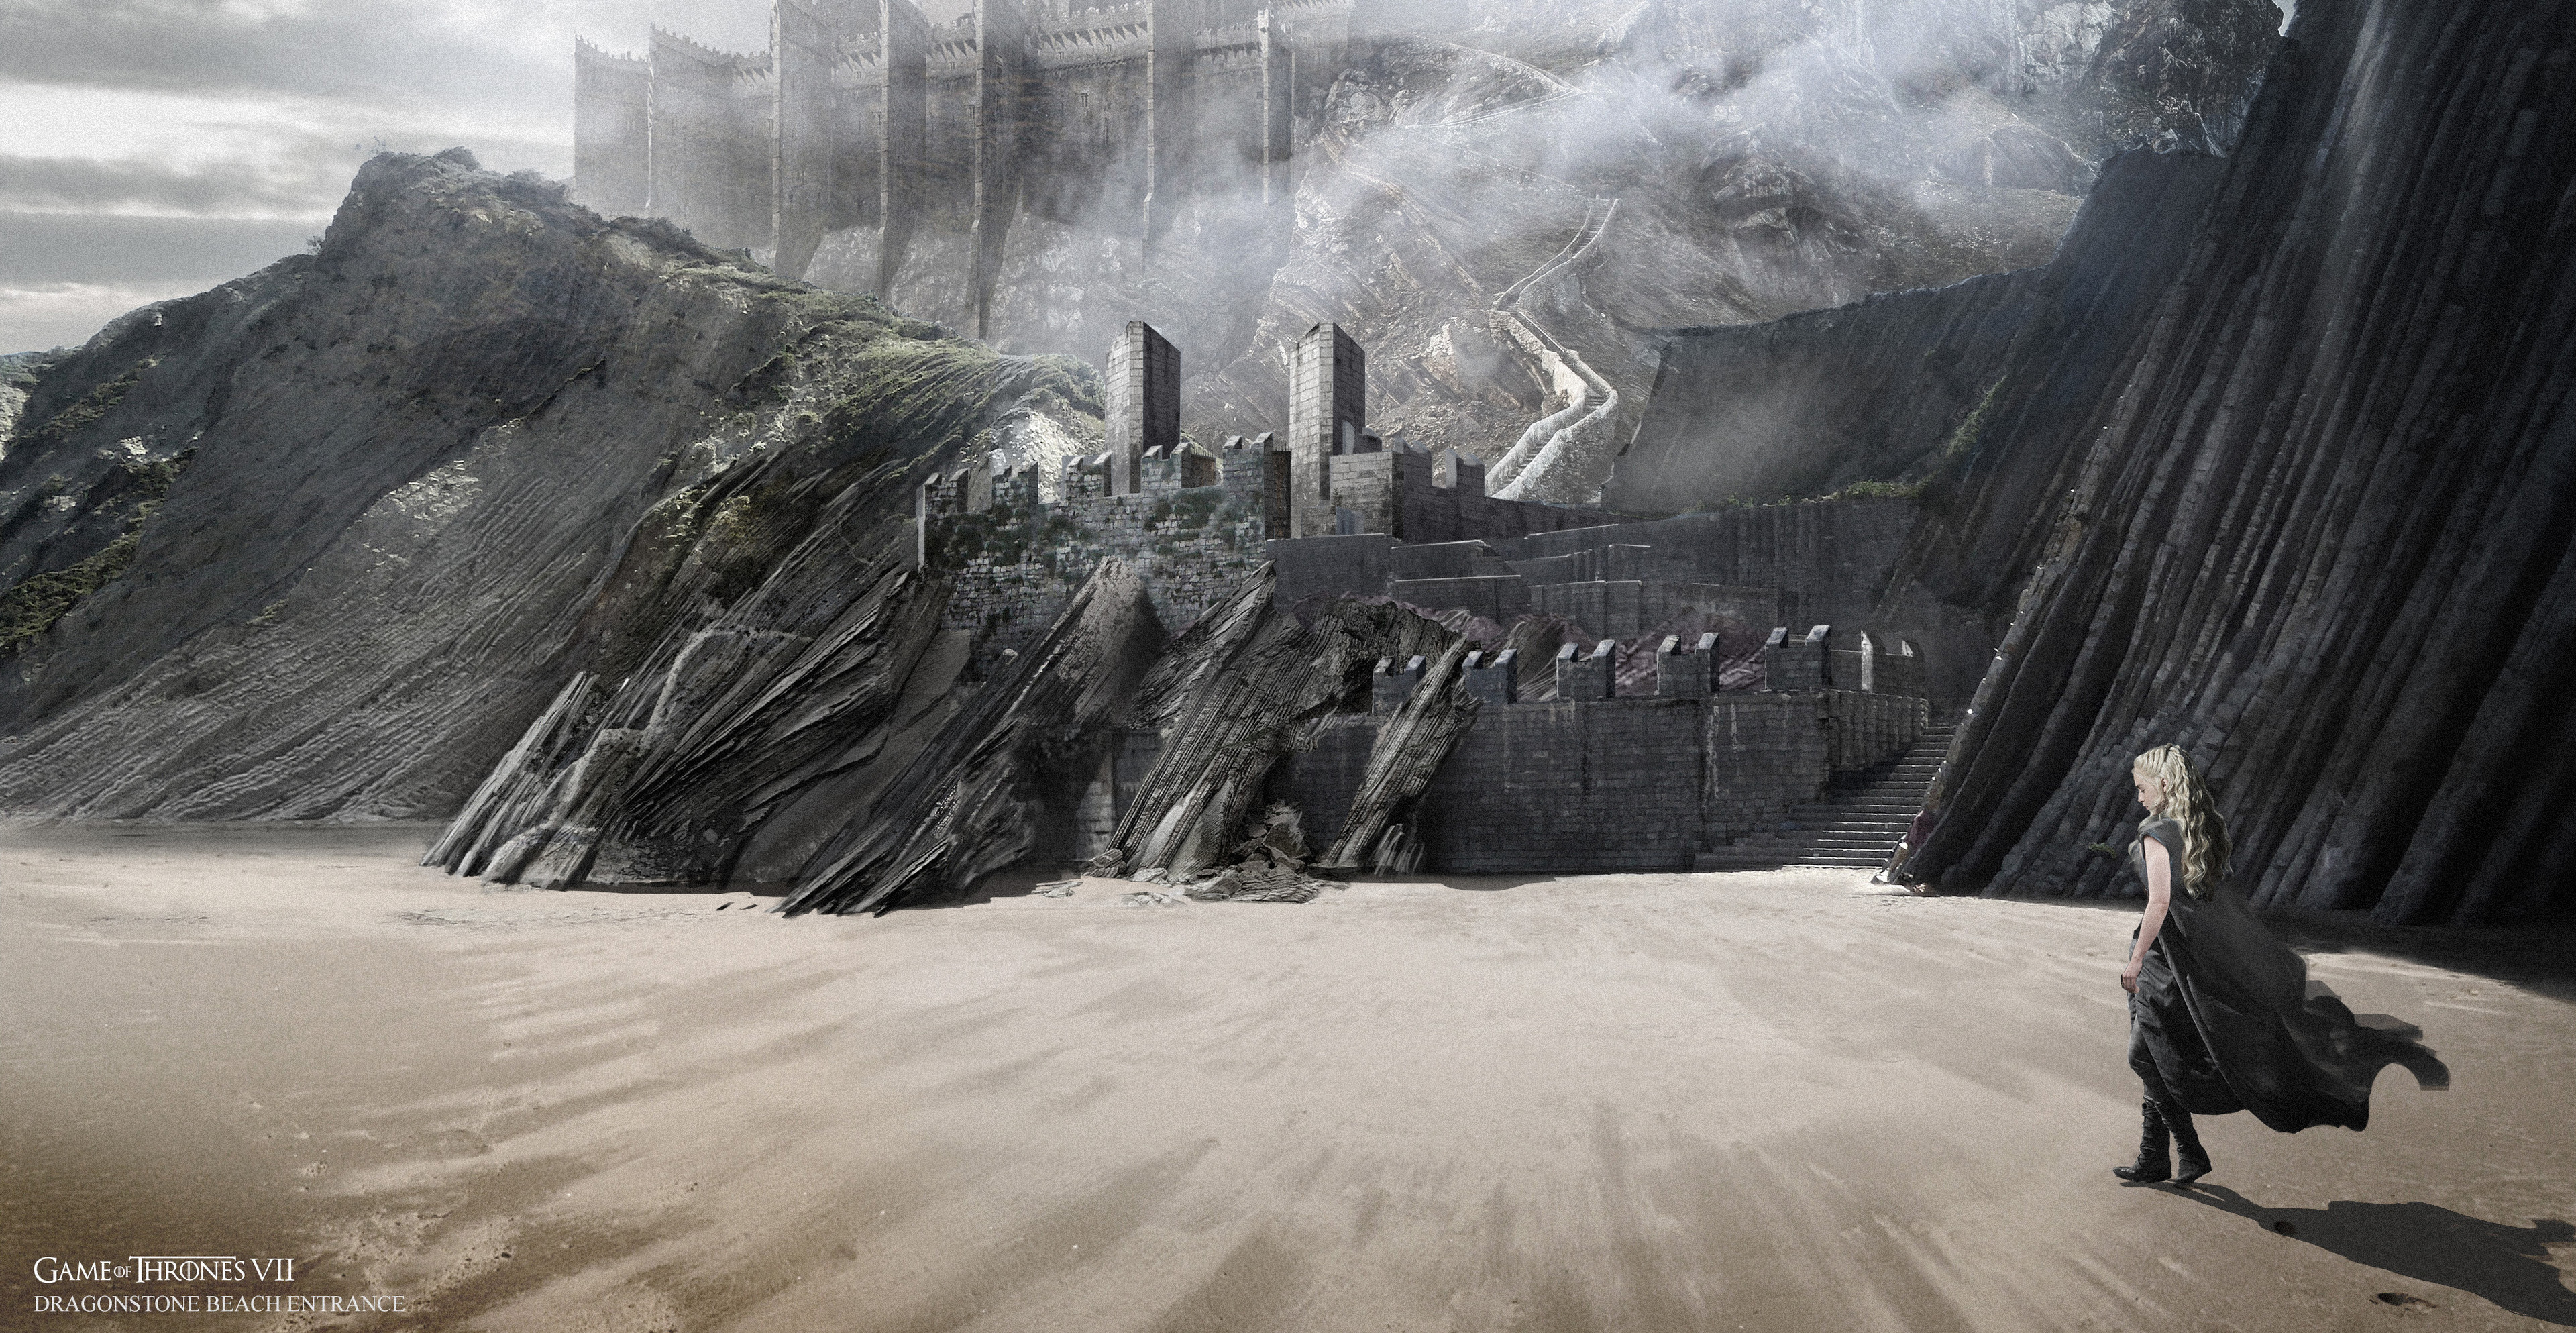 This was a concept to show how the gate would look with steps leading up, based on the Zumaia beach location.